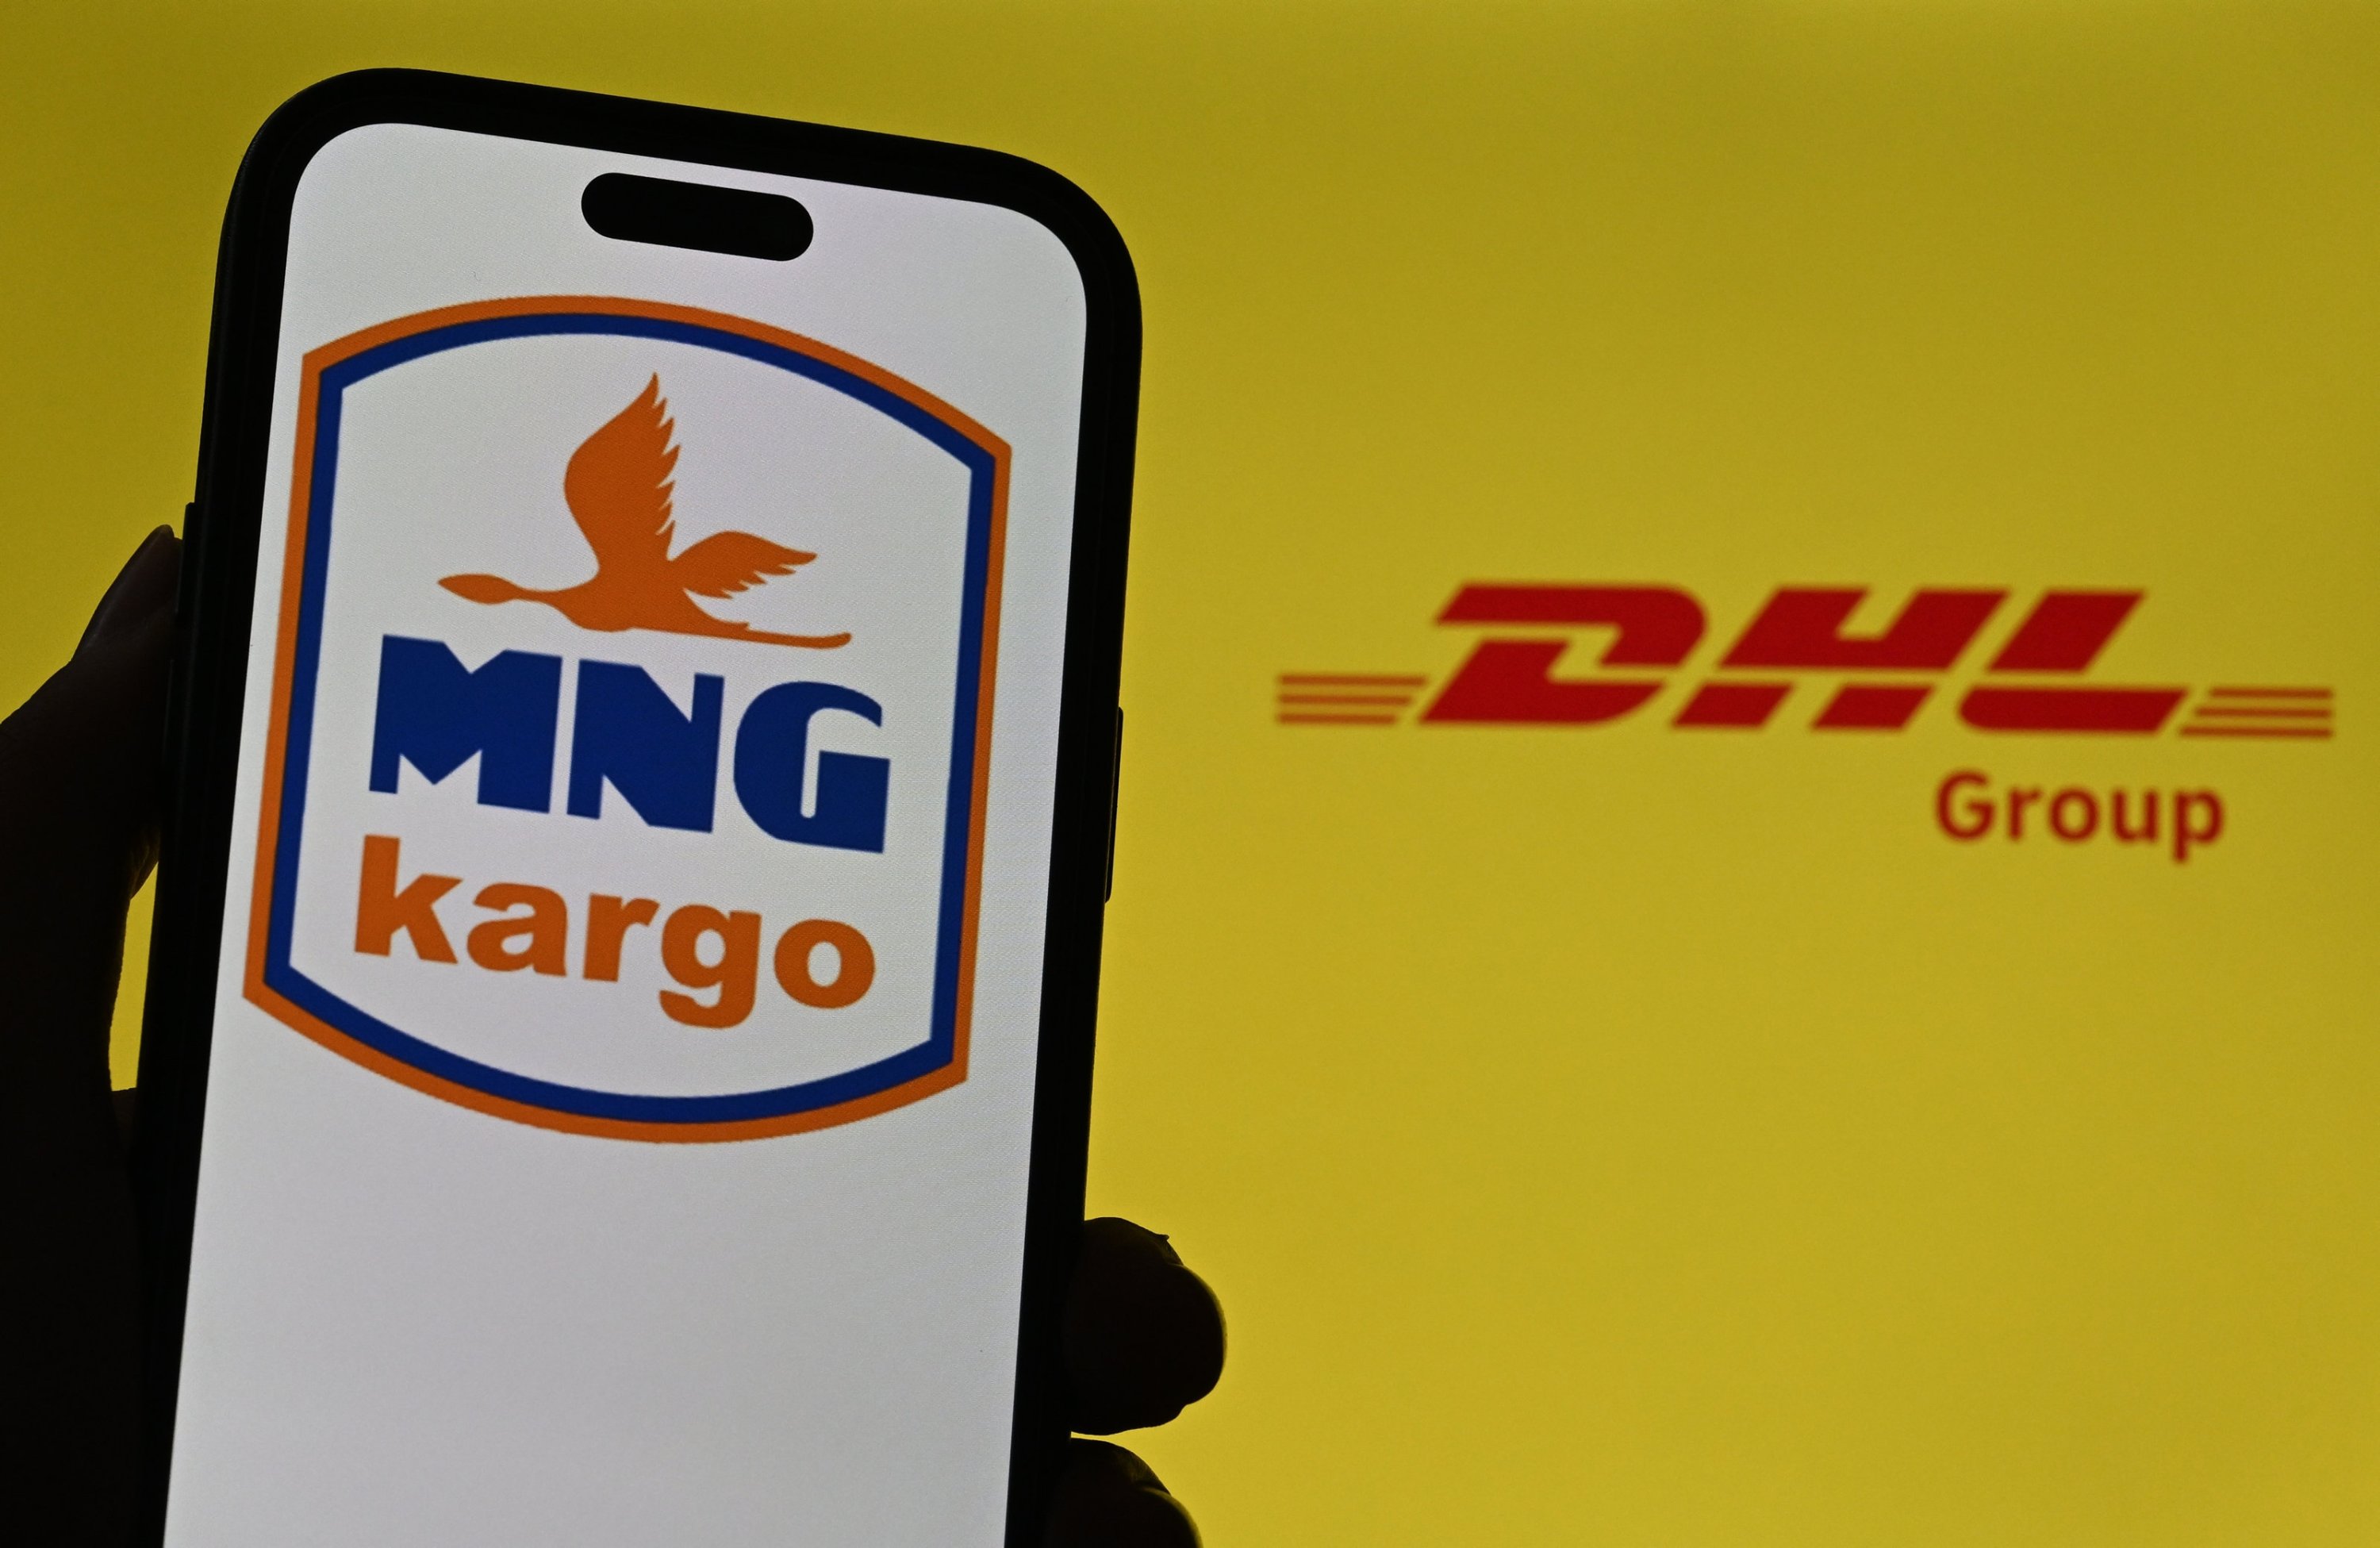 Germany’s DHL to buy Turkish parcel delivery provider MNG Kargo | Daily ...